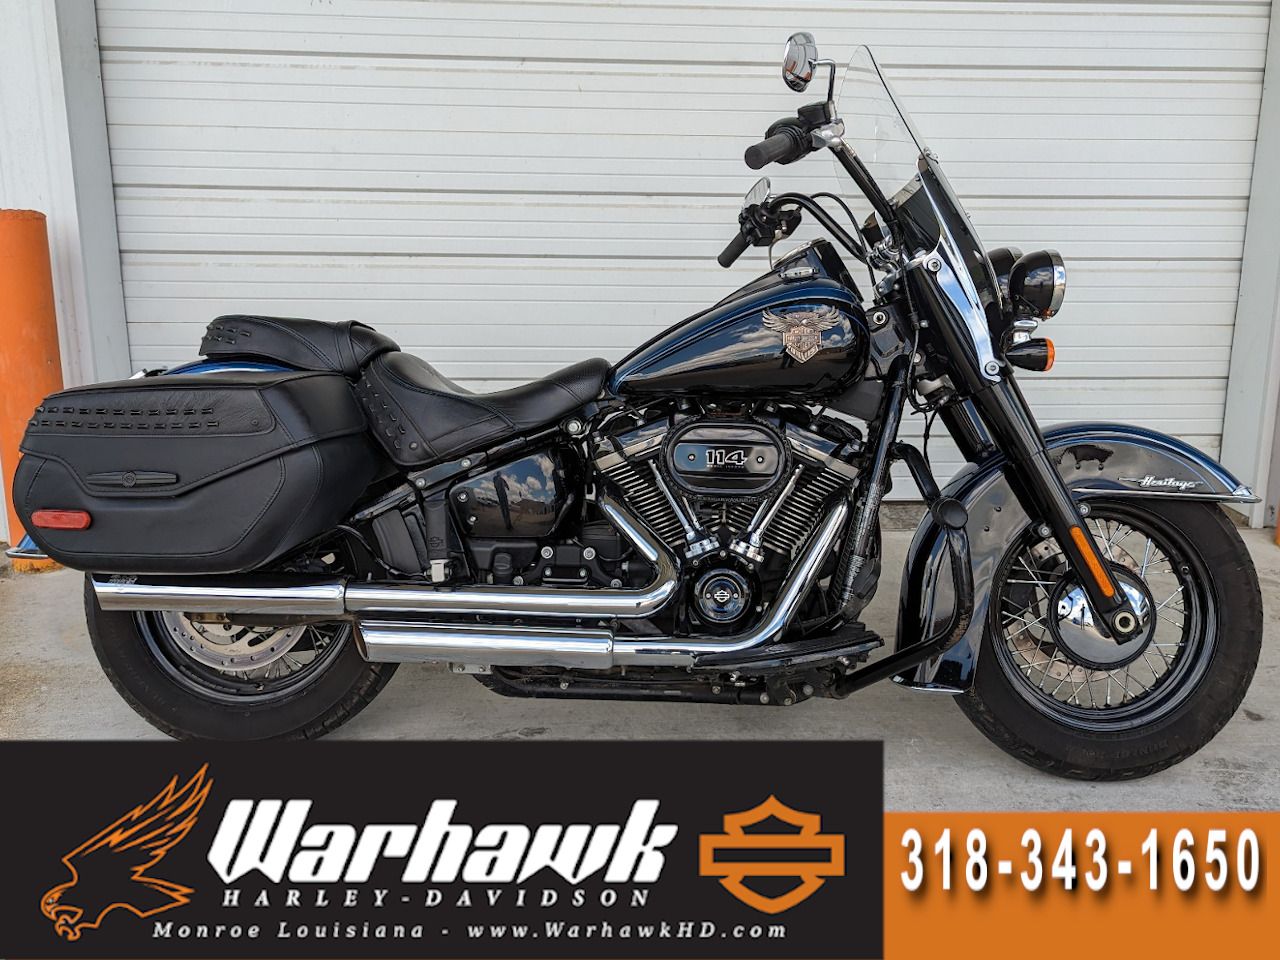 clean 2018 harley davidson 115th anniversary heritage 114 for sale near me - Photo 1